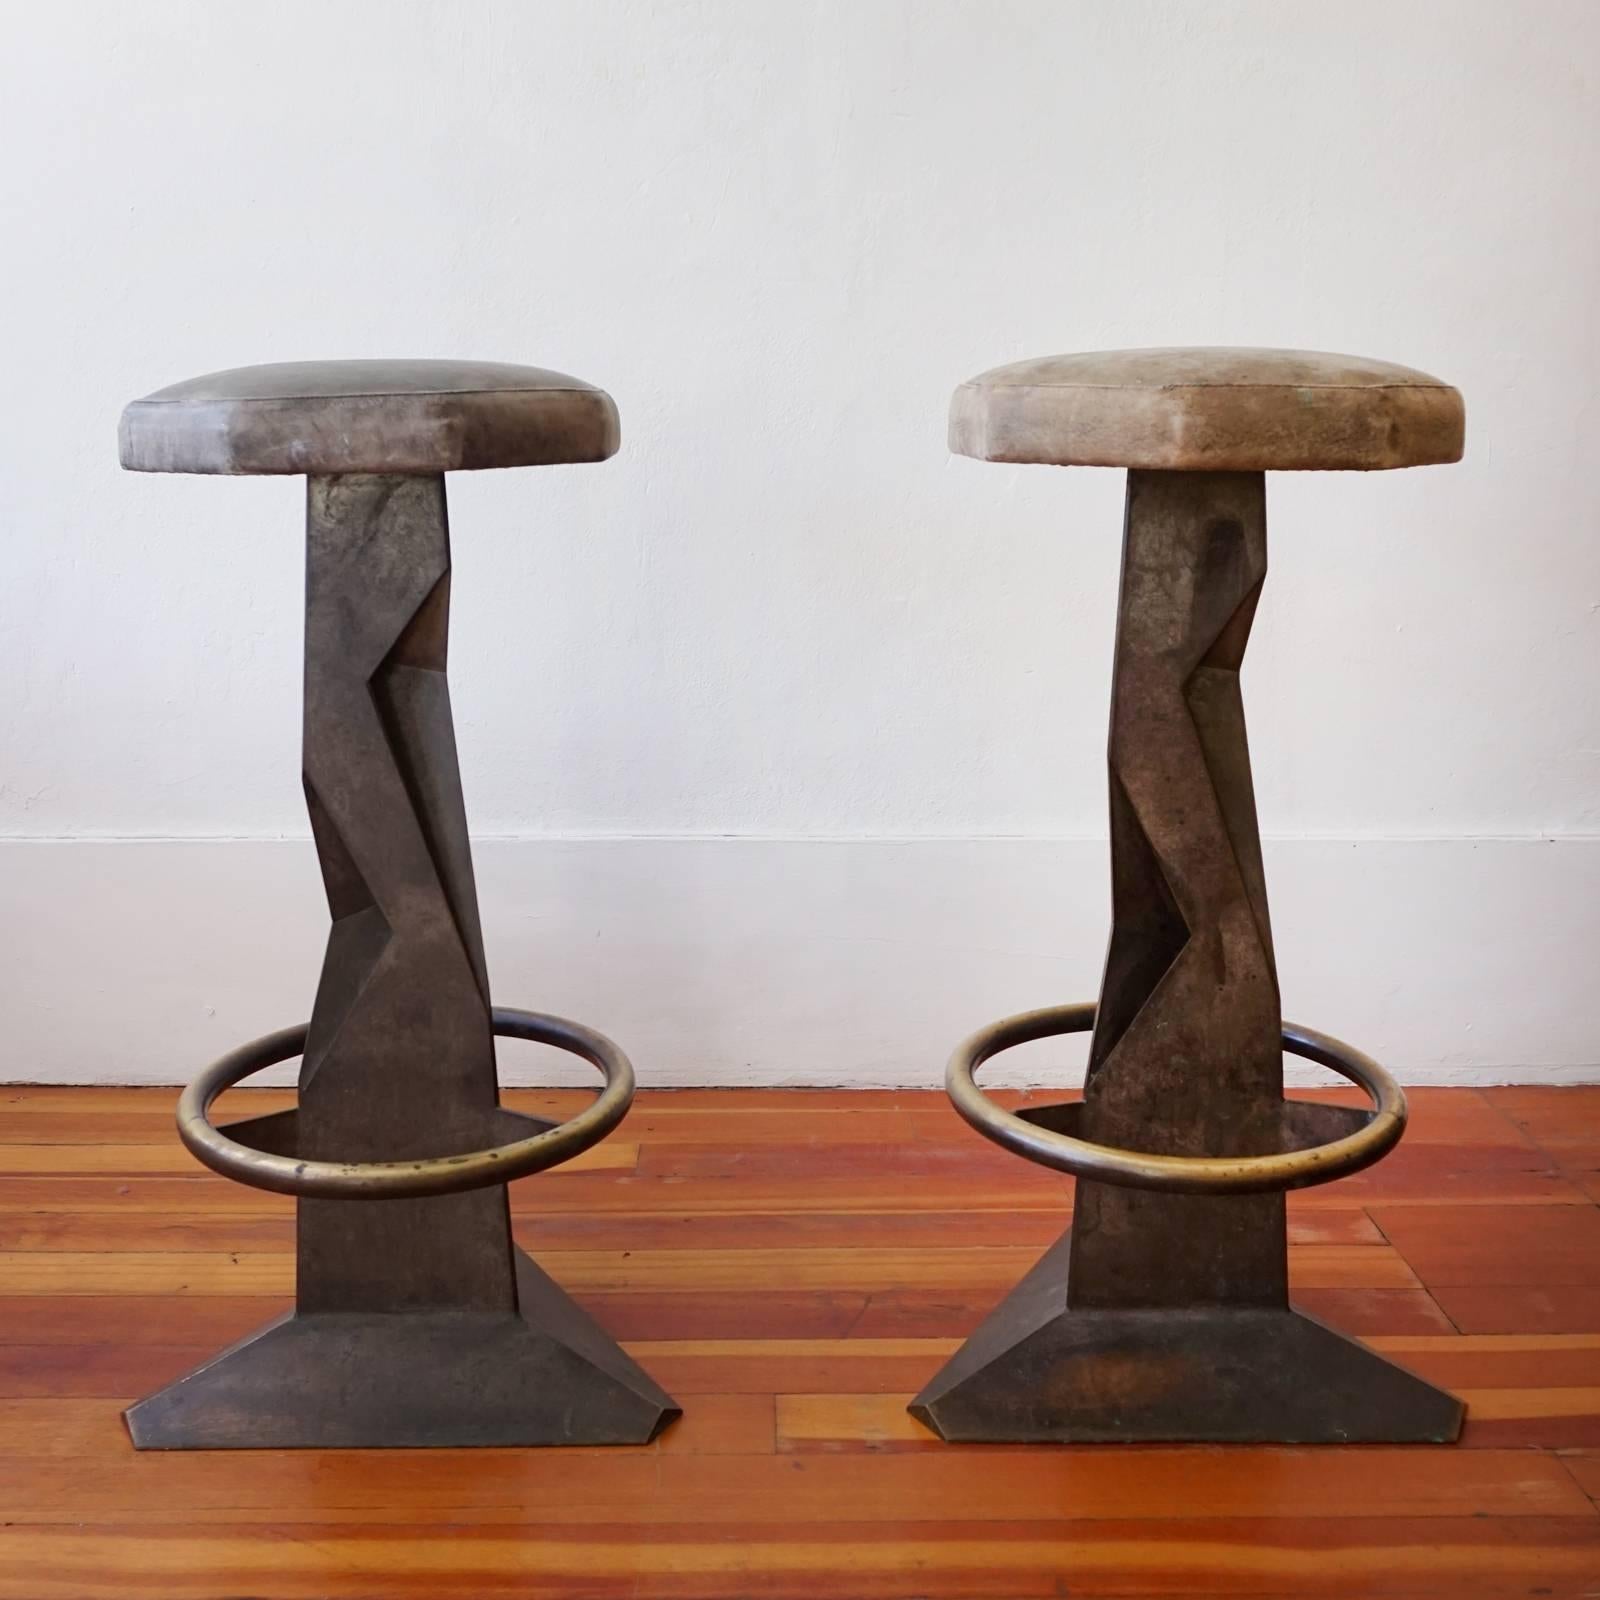 Pair of Brutalist Metal Bar Stools In Good Condition For Sale In San Diego, CA